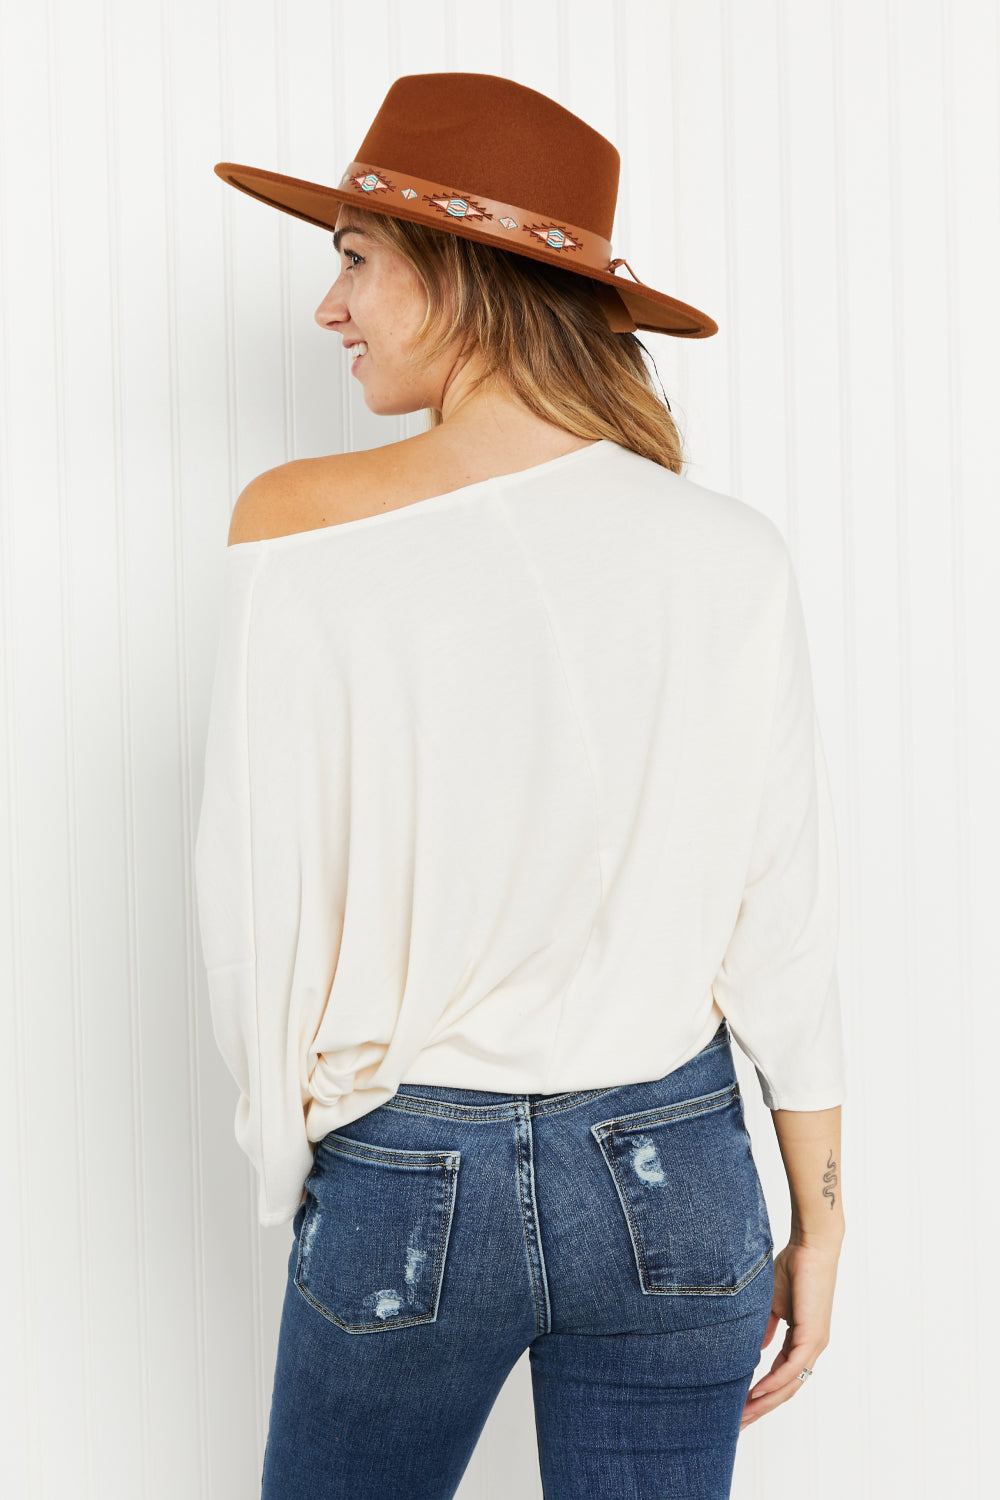 Andree by Unit Toasting Almonds Full Size Dolman Sleeve Knit Top